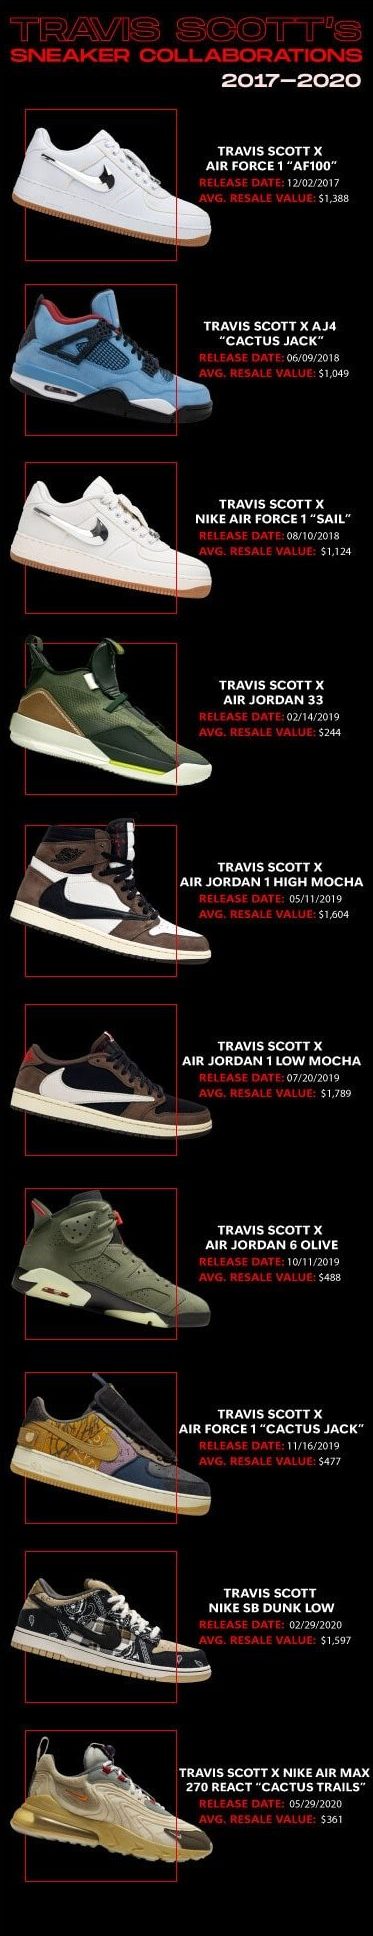 Travis Scott Drops Full Merch Capsule With fragment Featuring a